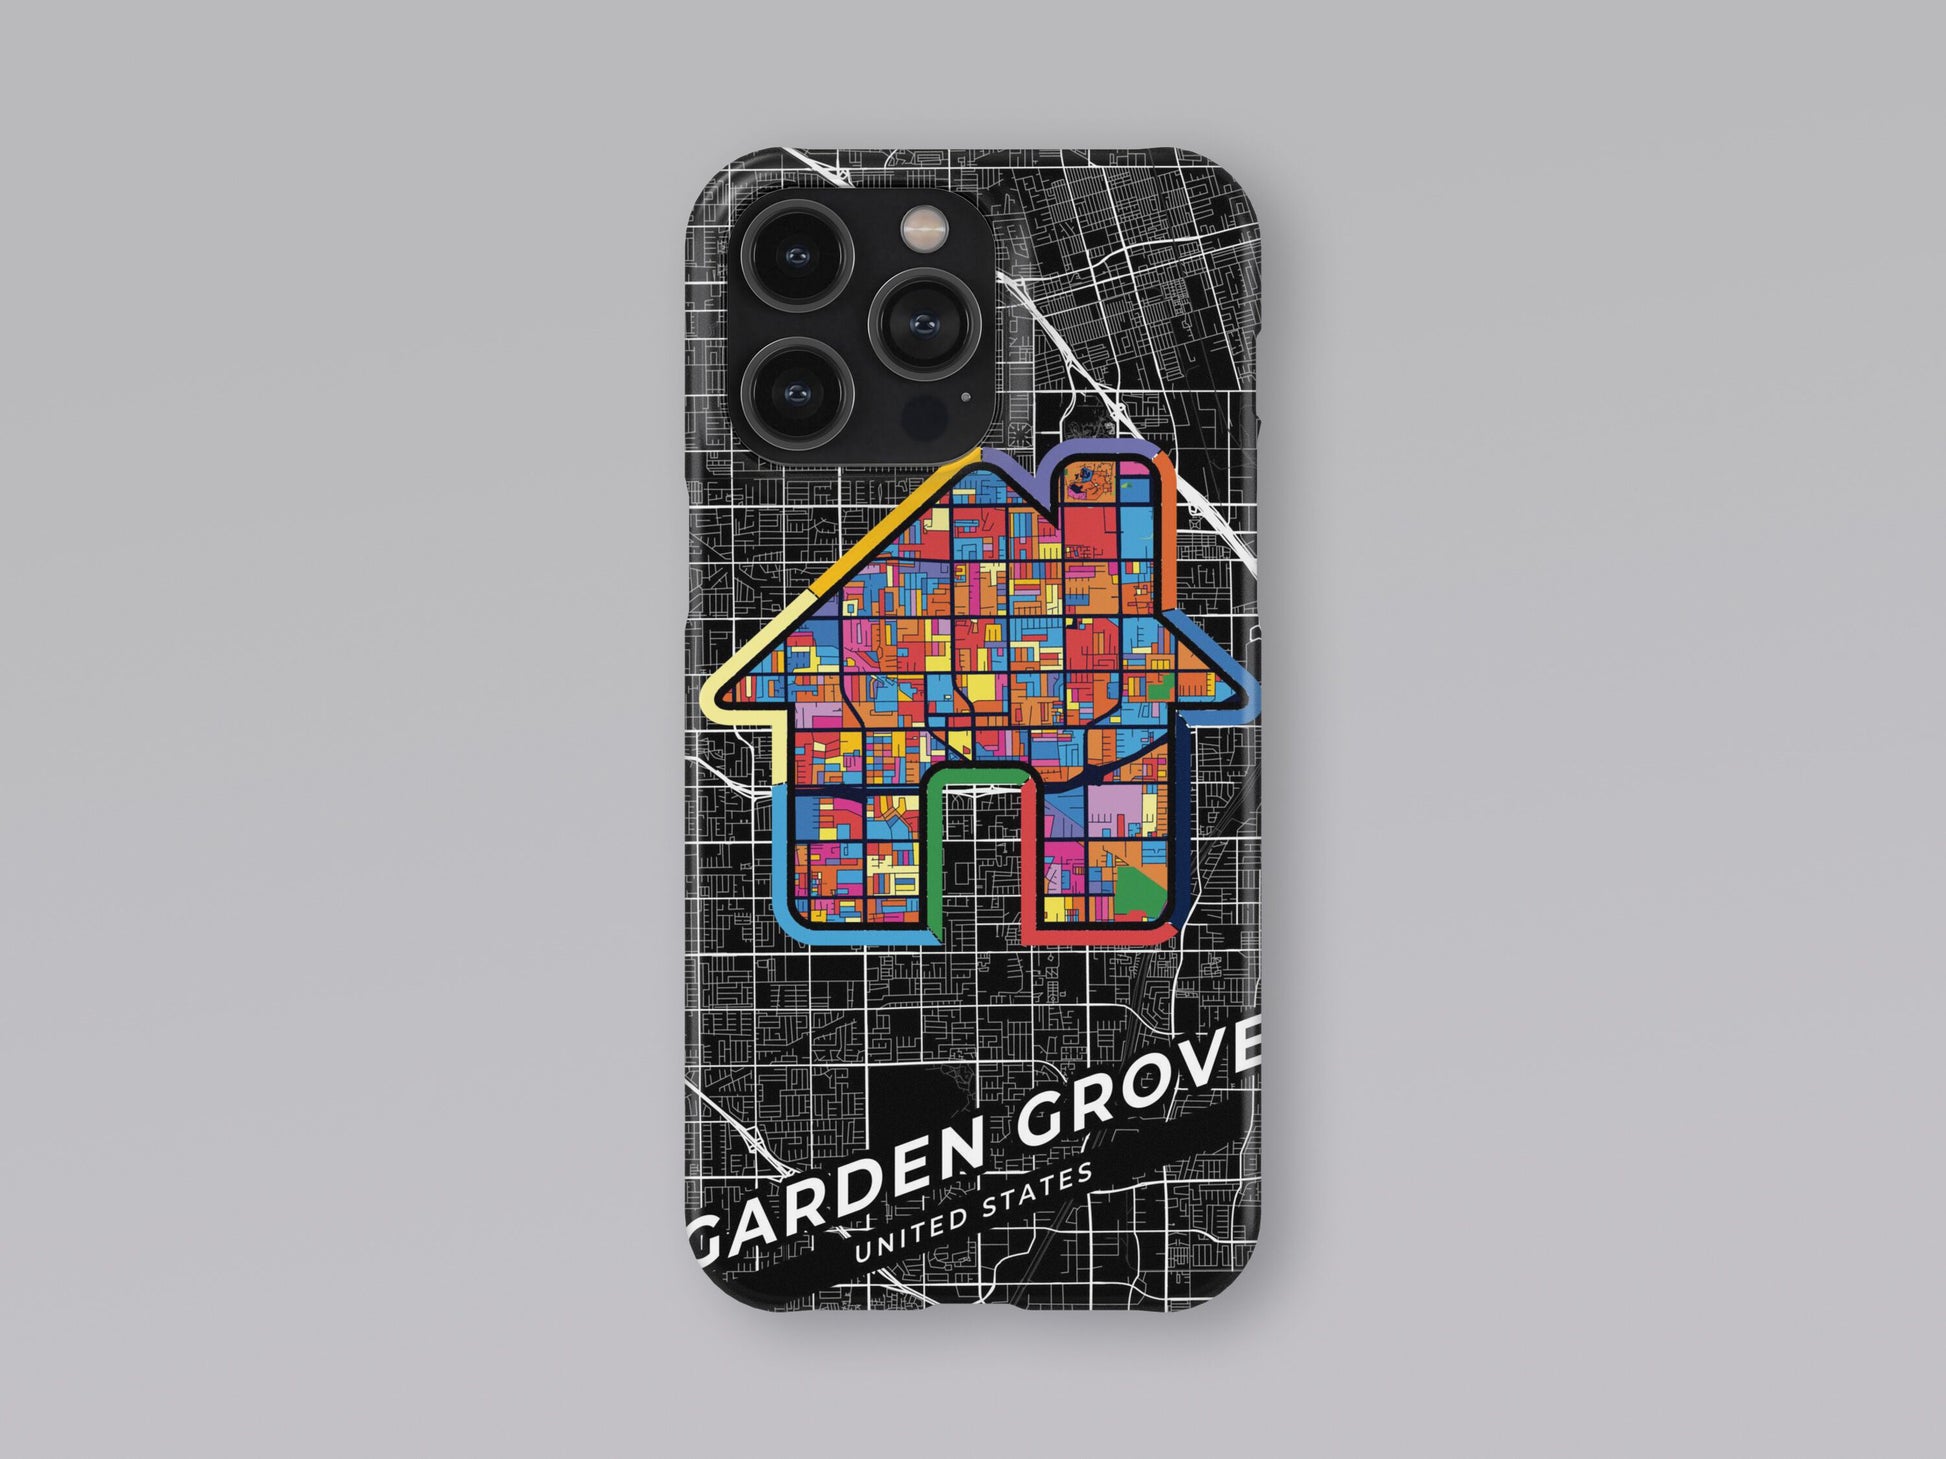 Garden Grove California slim phone case with colorful icon. Birthday, wedding or housewarming gift. Couple match cases. 3